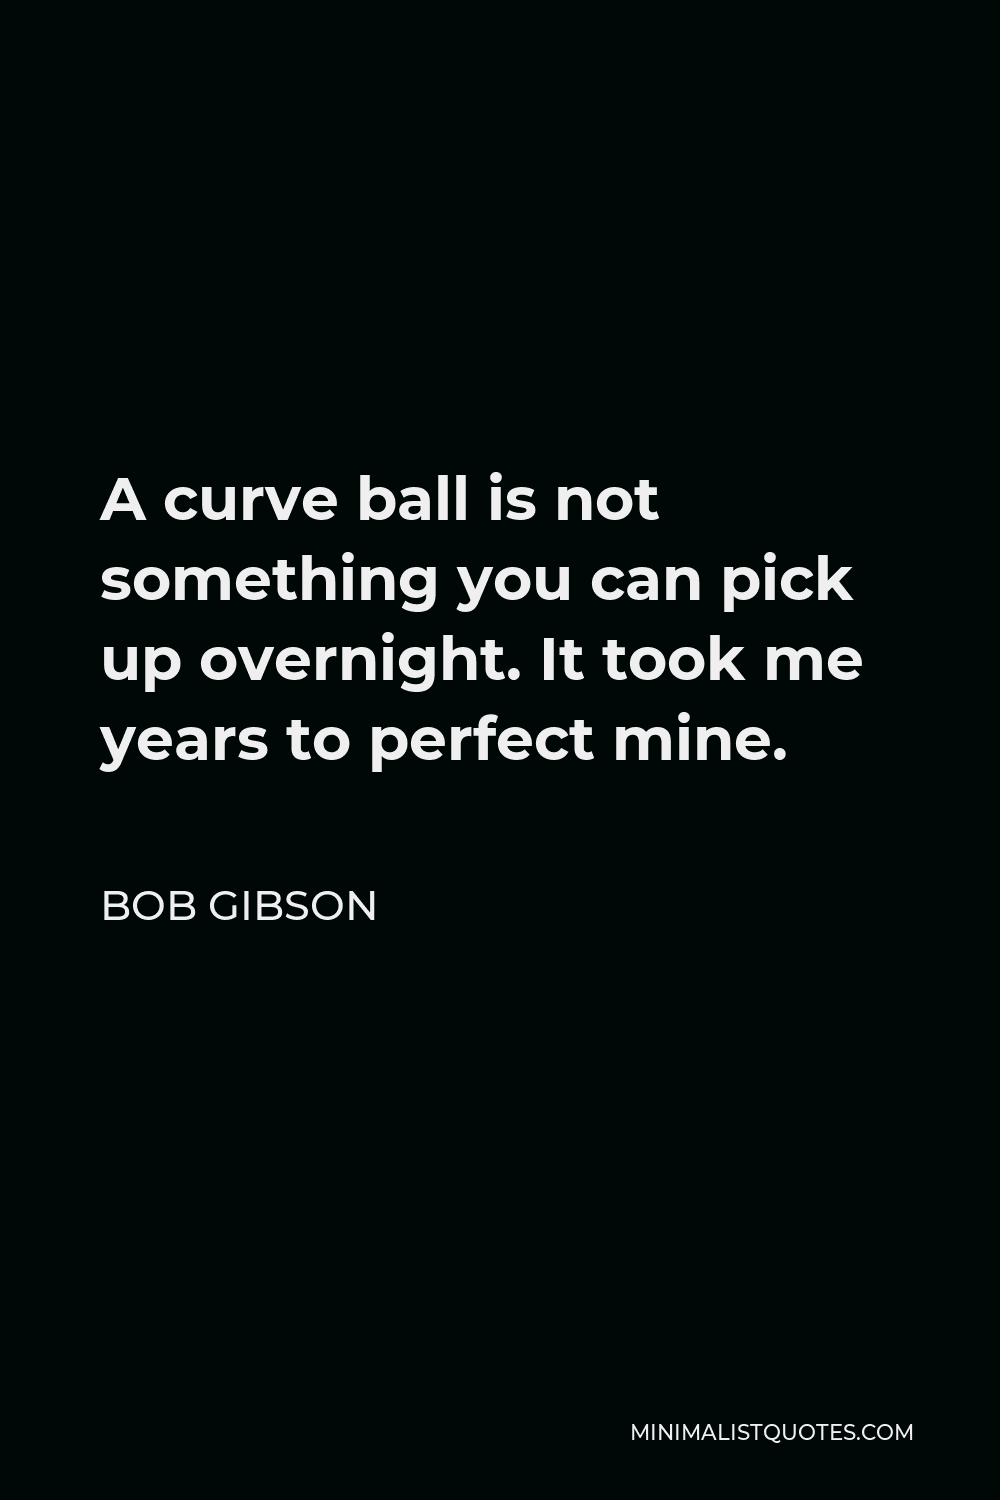 Bob Gibson Quote - A curve ball is not something you can pick up overnight. It took me years to perfect mine.